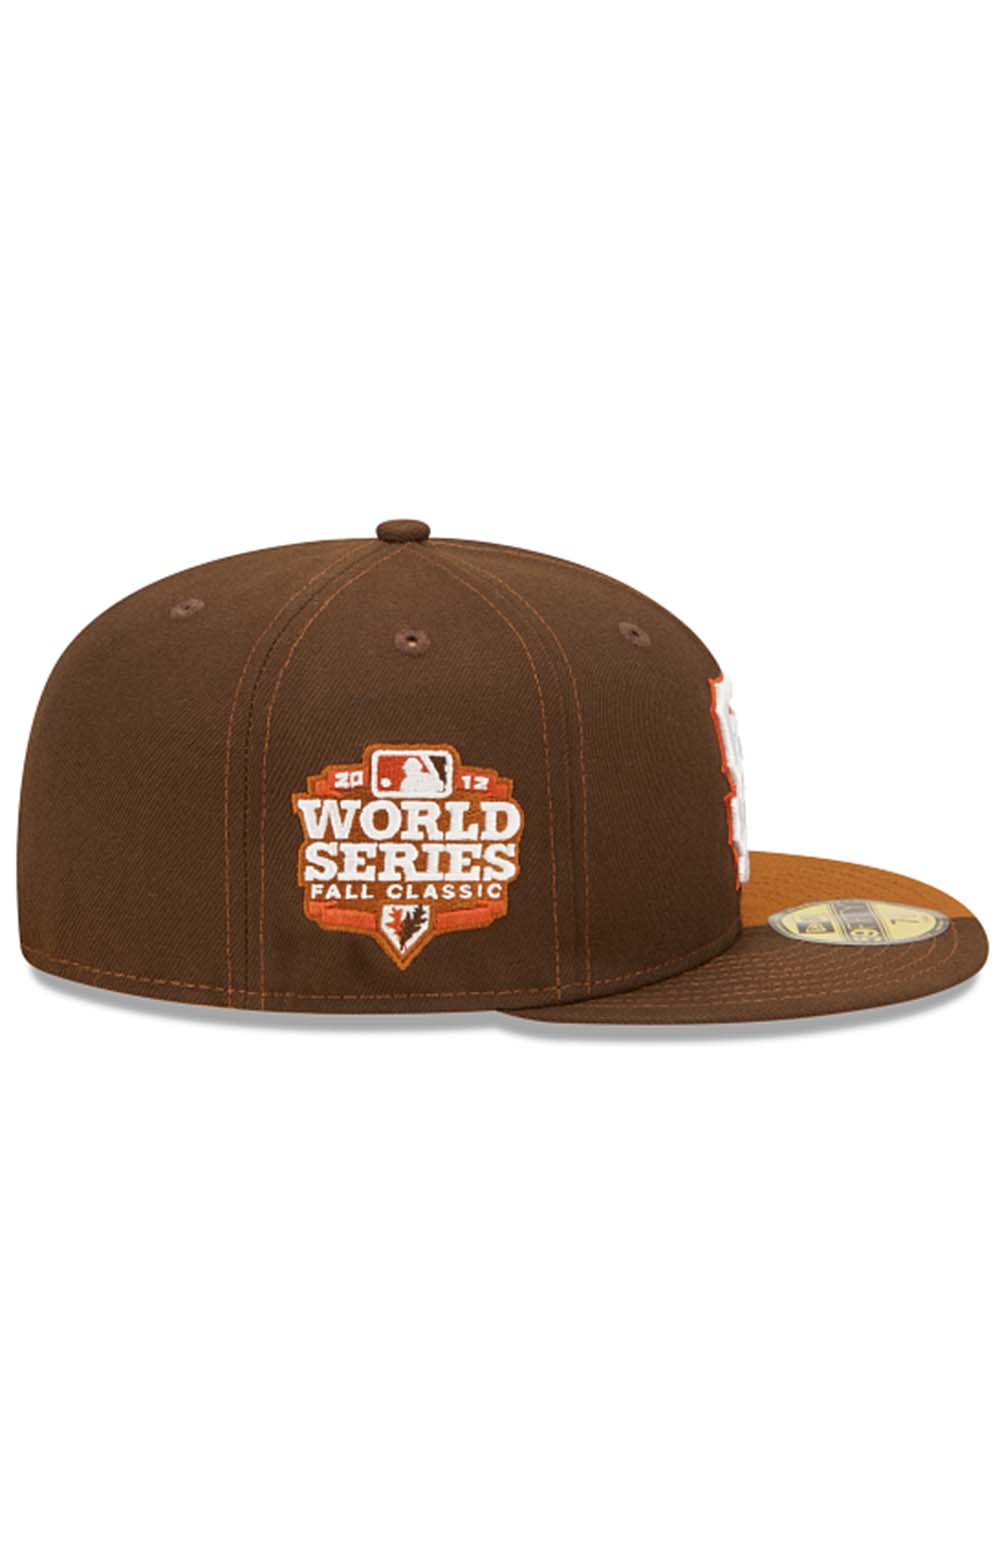 SF Giants Split 59Fifty Fitted Hat